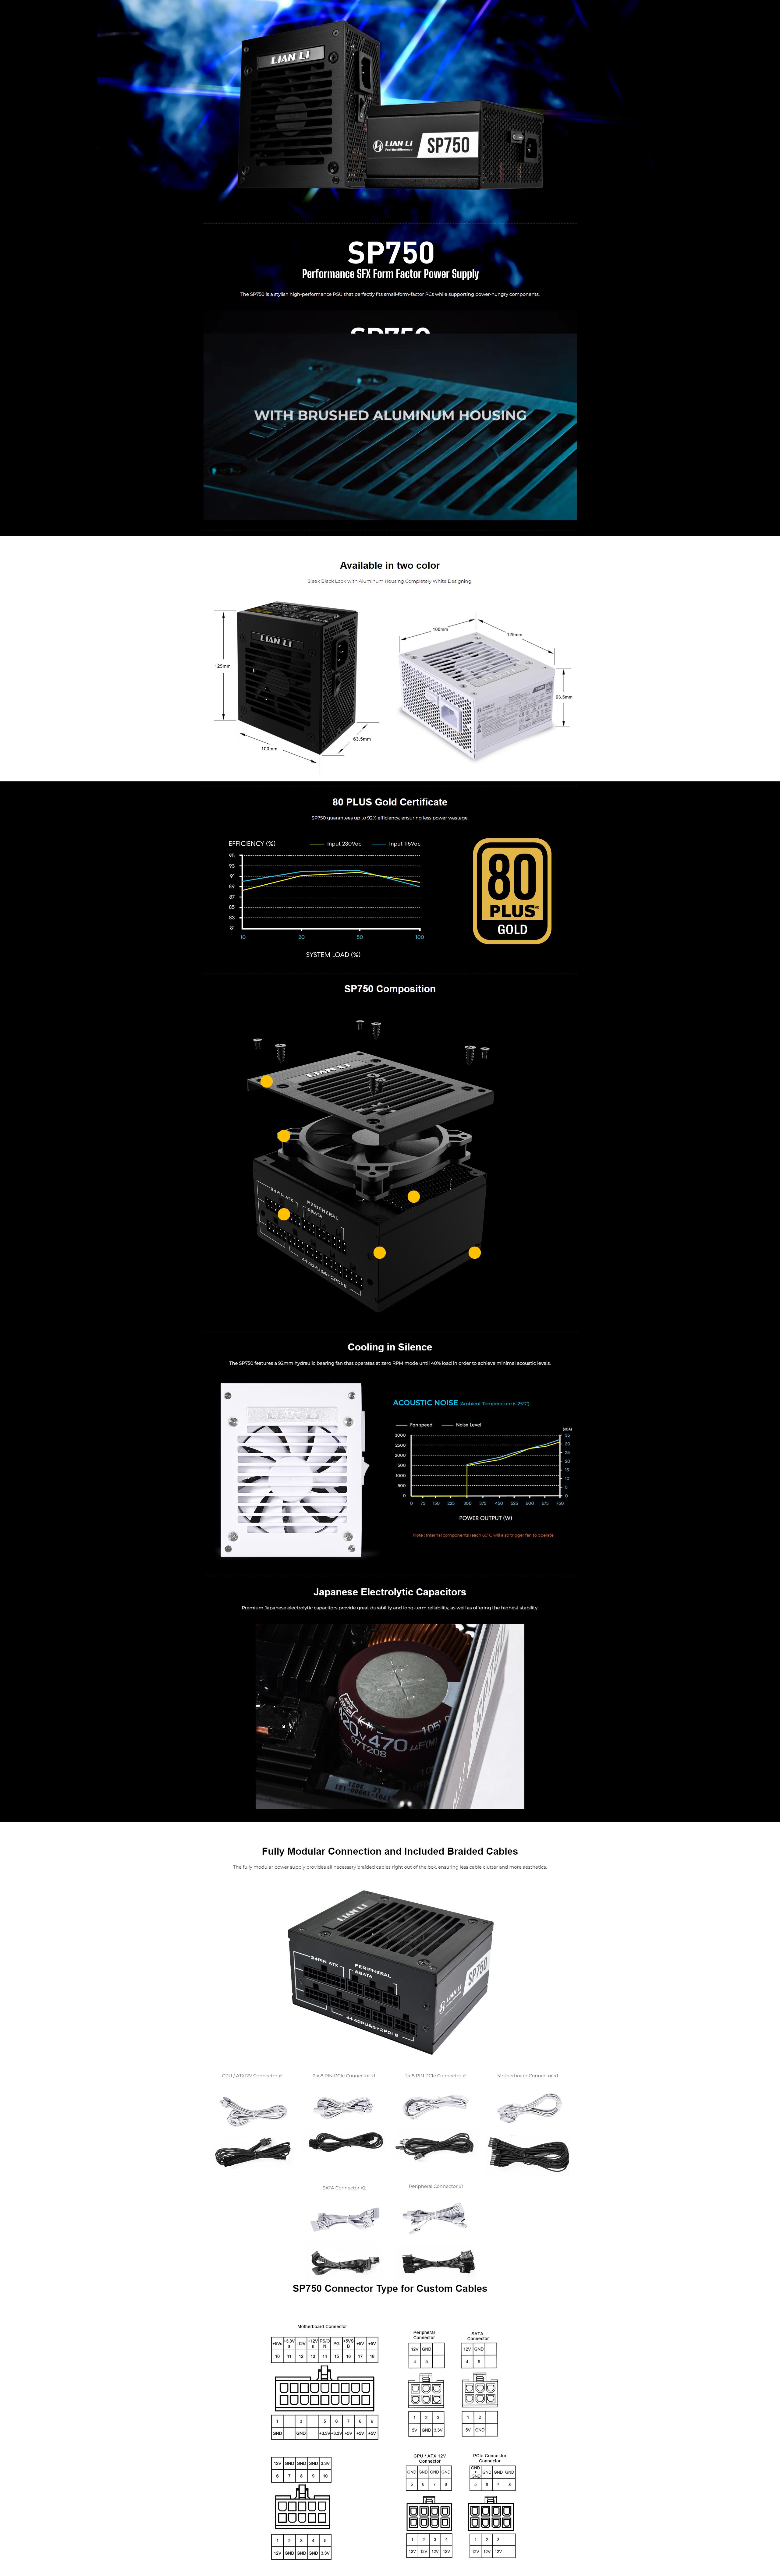 A large marketing image providing additional information about the product Lian Li SP750 750W Gold SFX Modular PSU - White - Additional alt info not provided